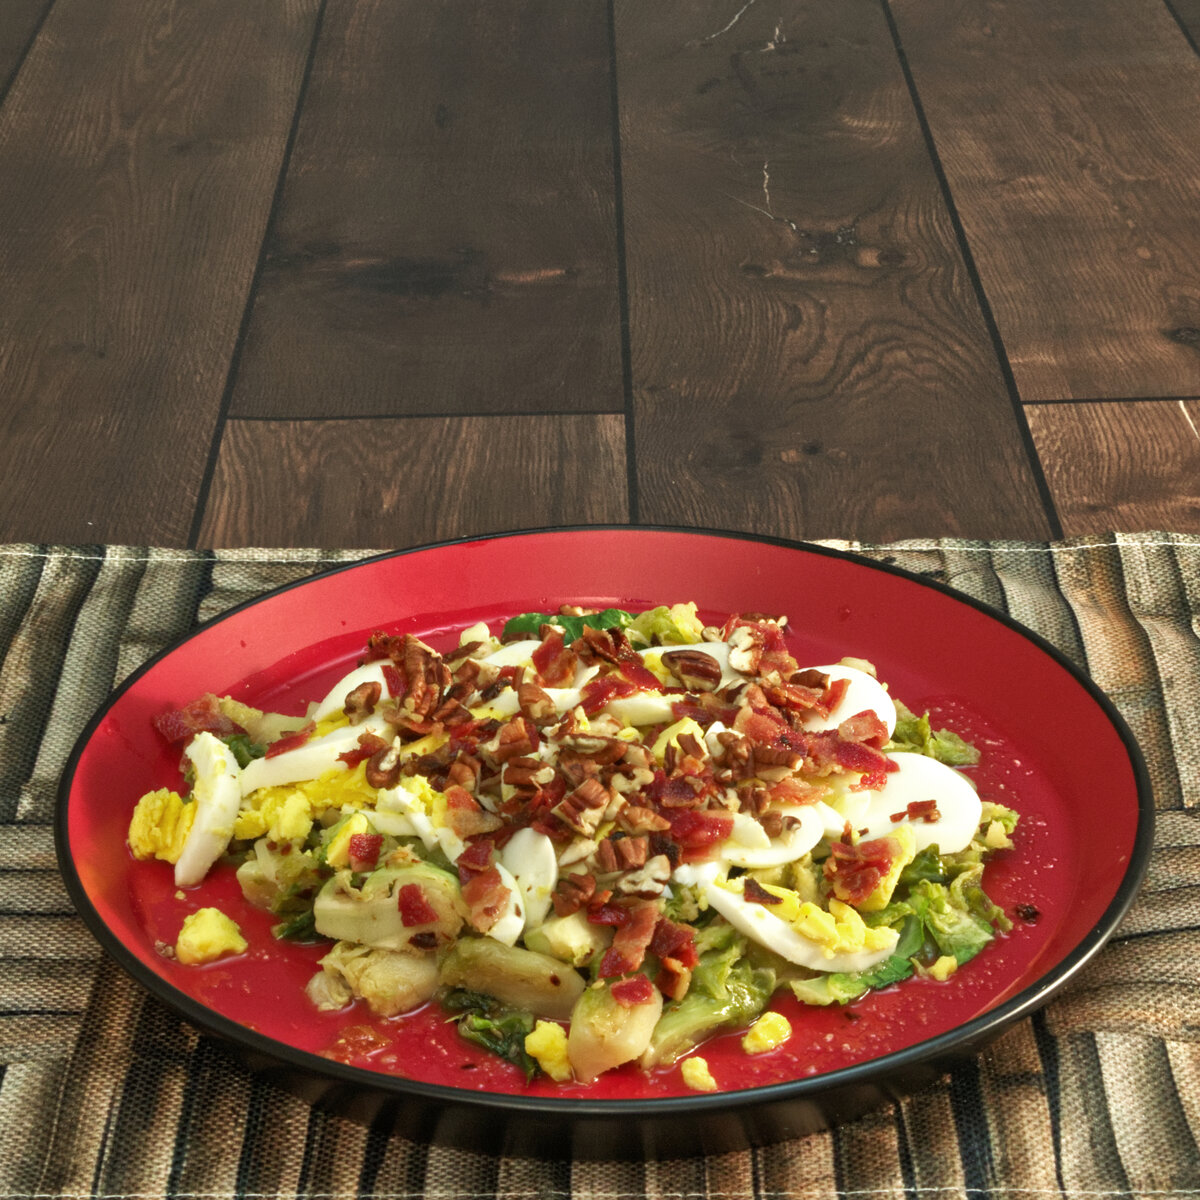 Honey, Bacon and Eggs Brussel Sprouts Salad